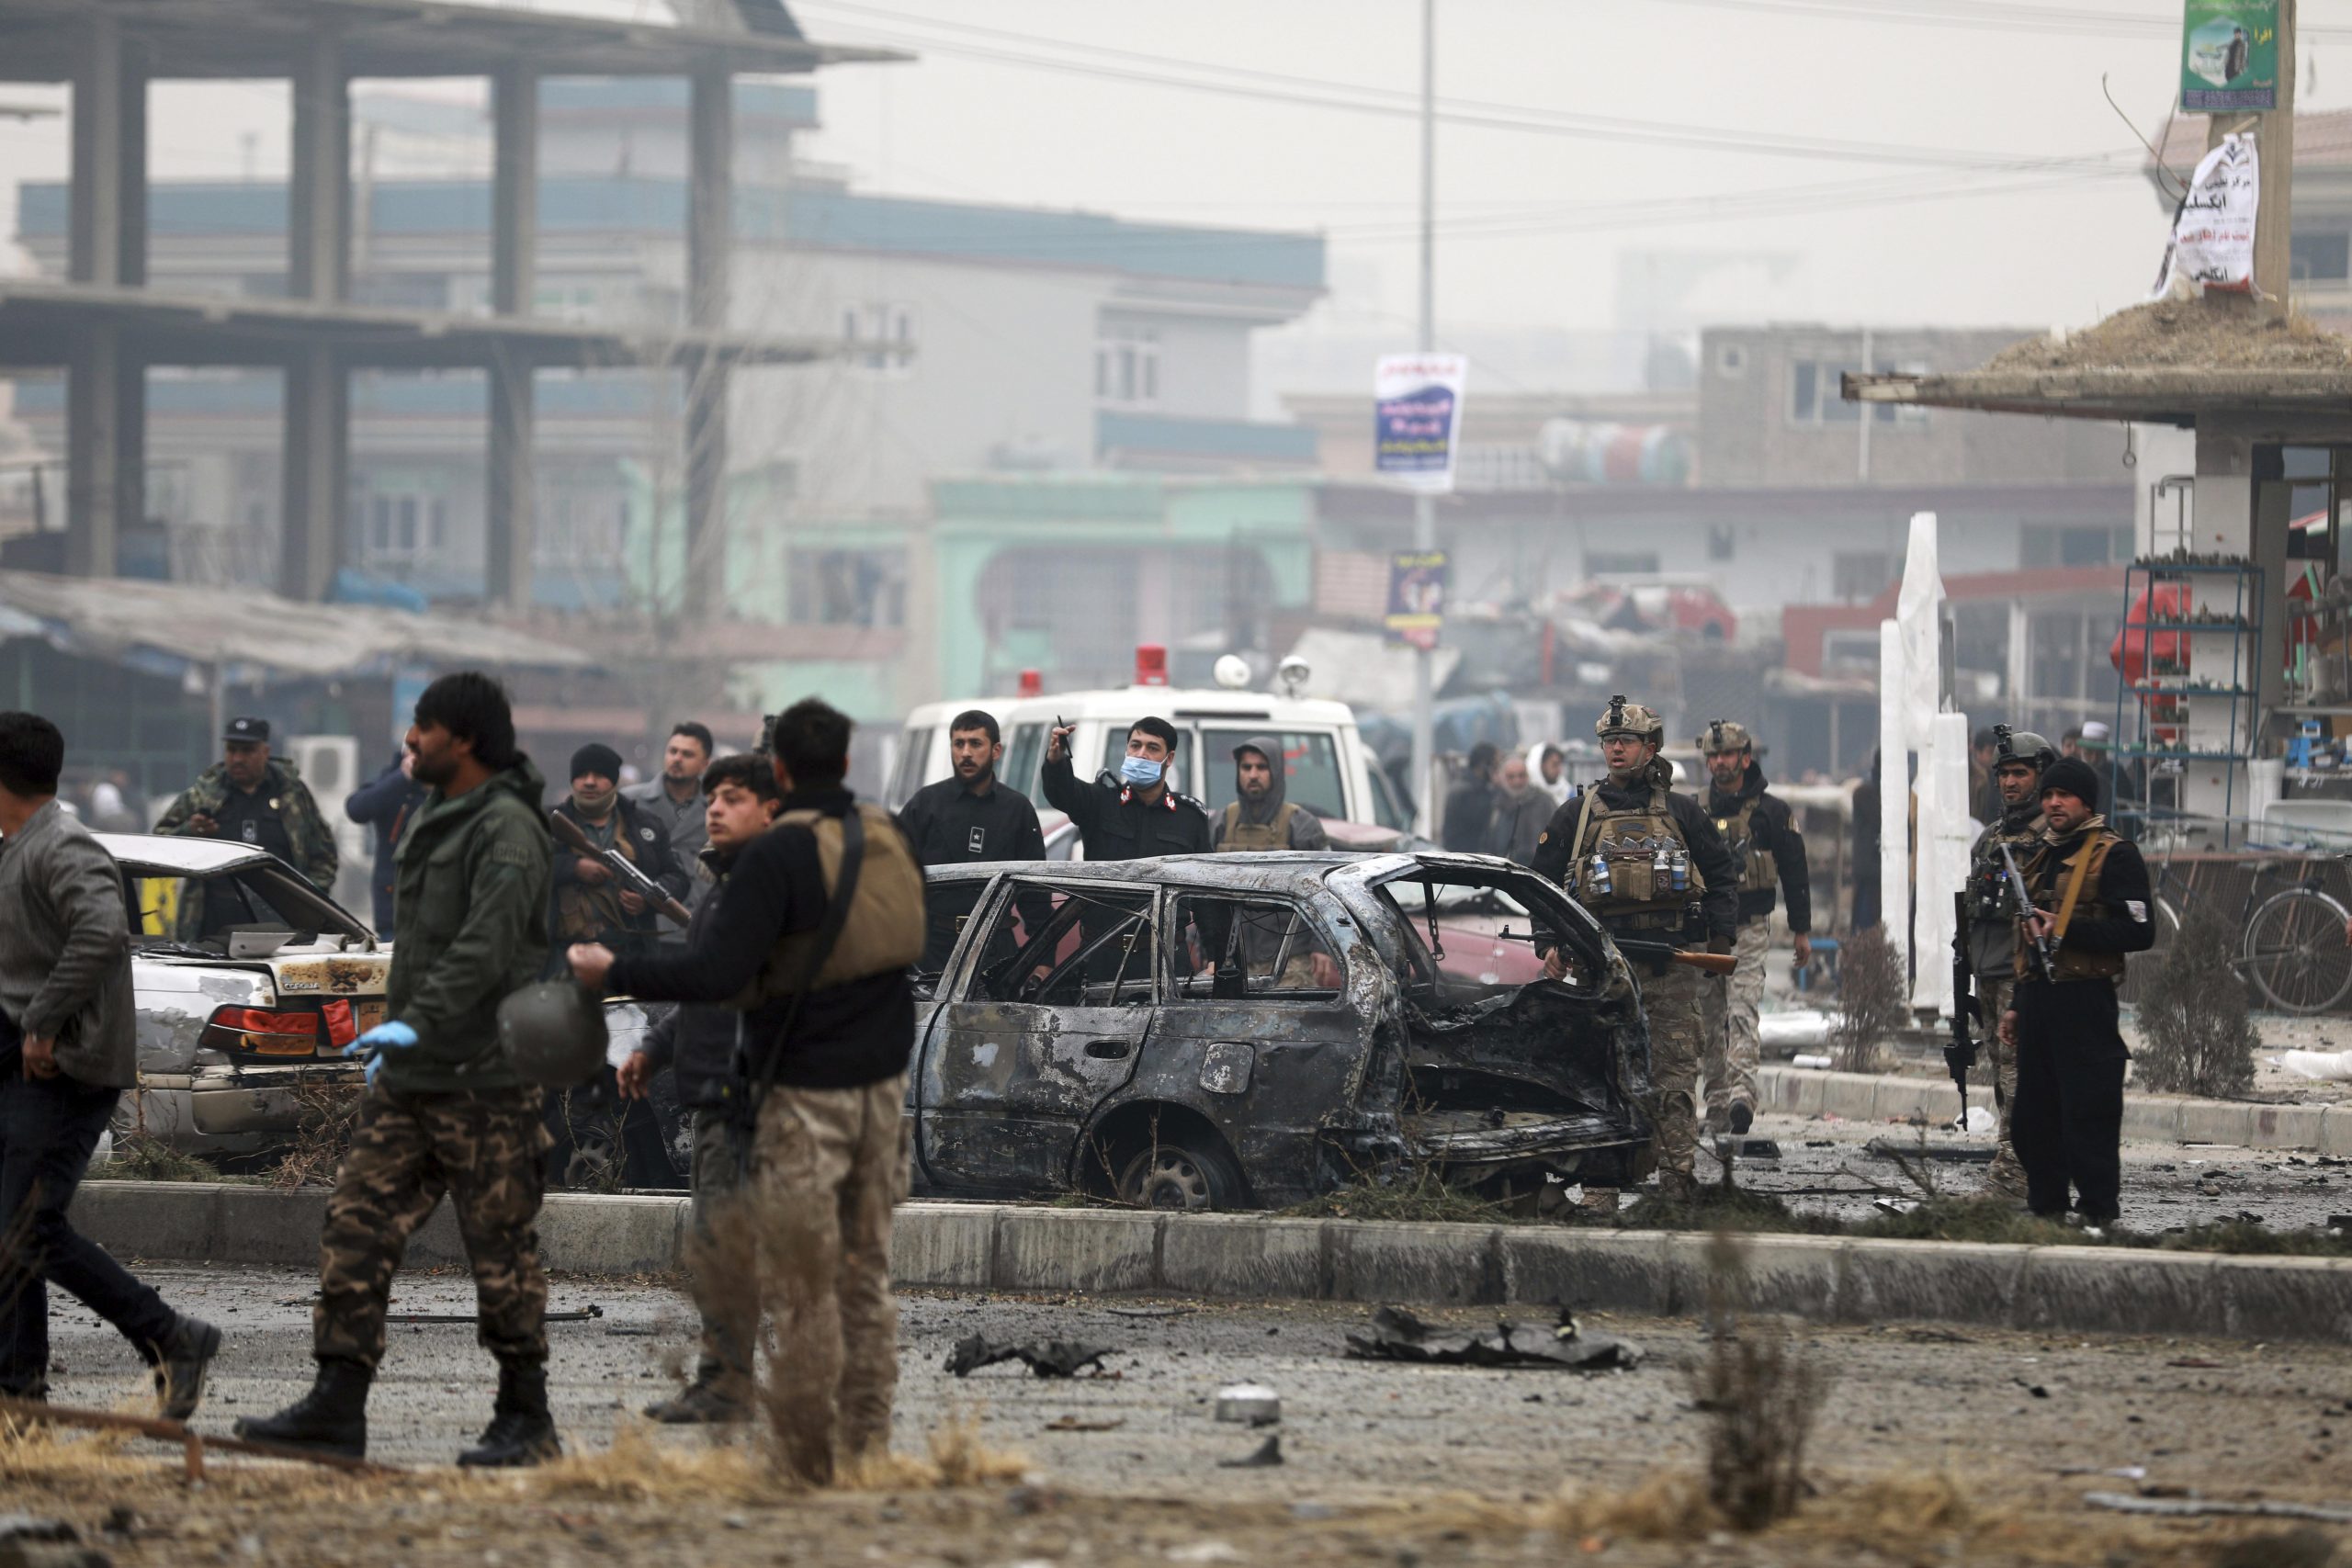 Afghan peace talks resume as bloodshed continues